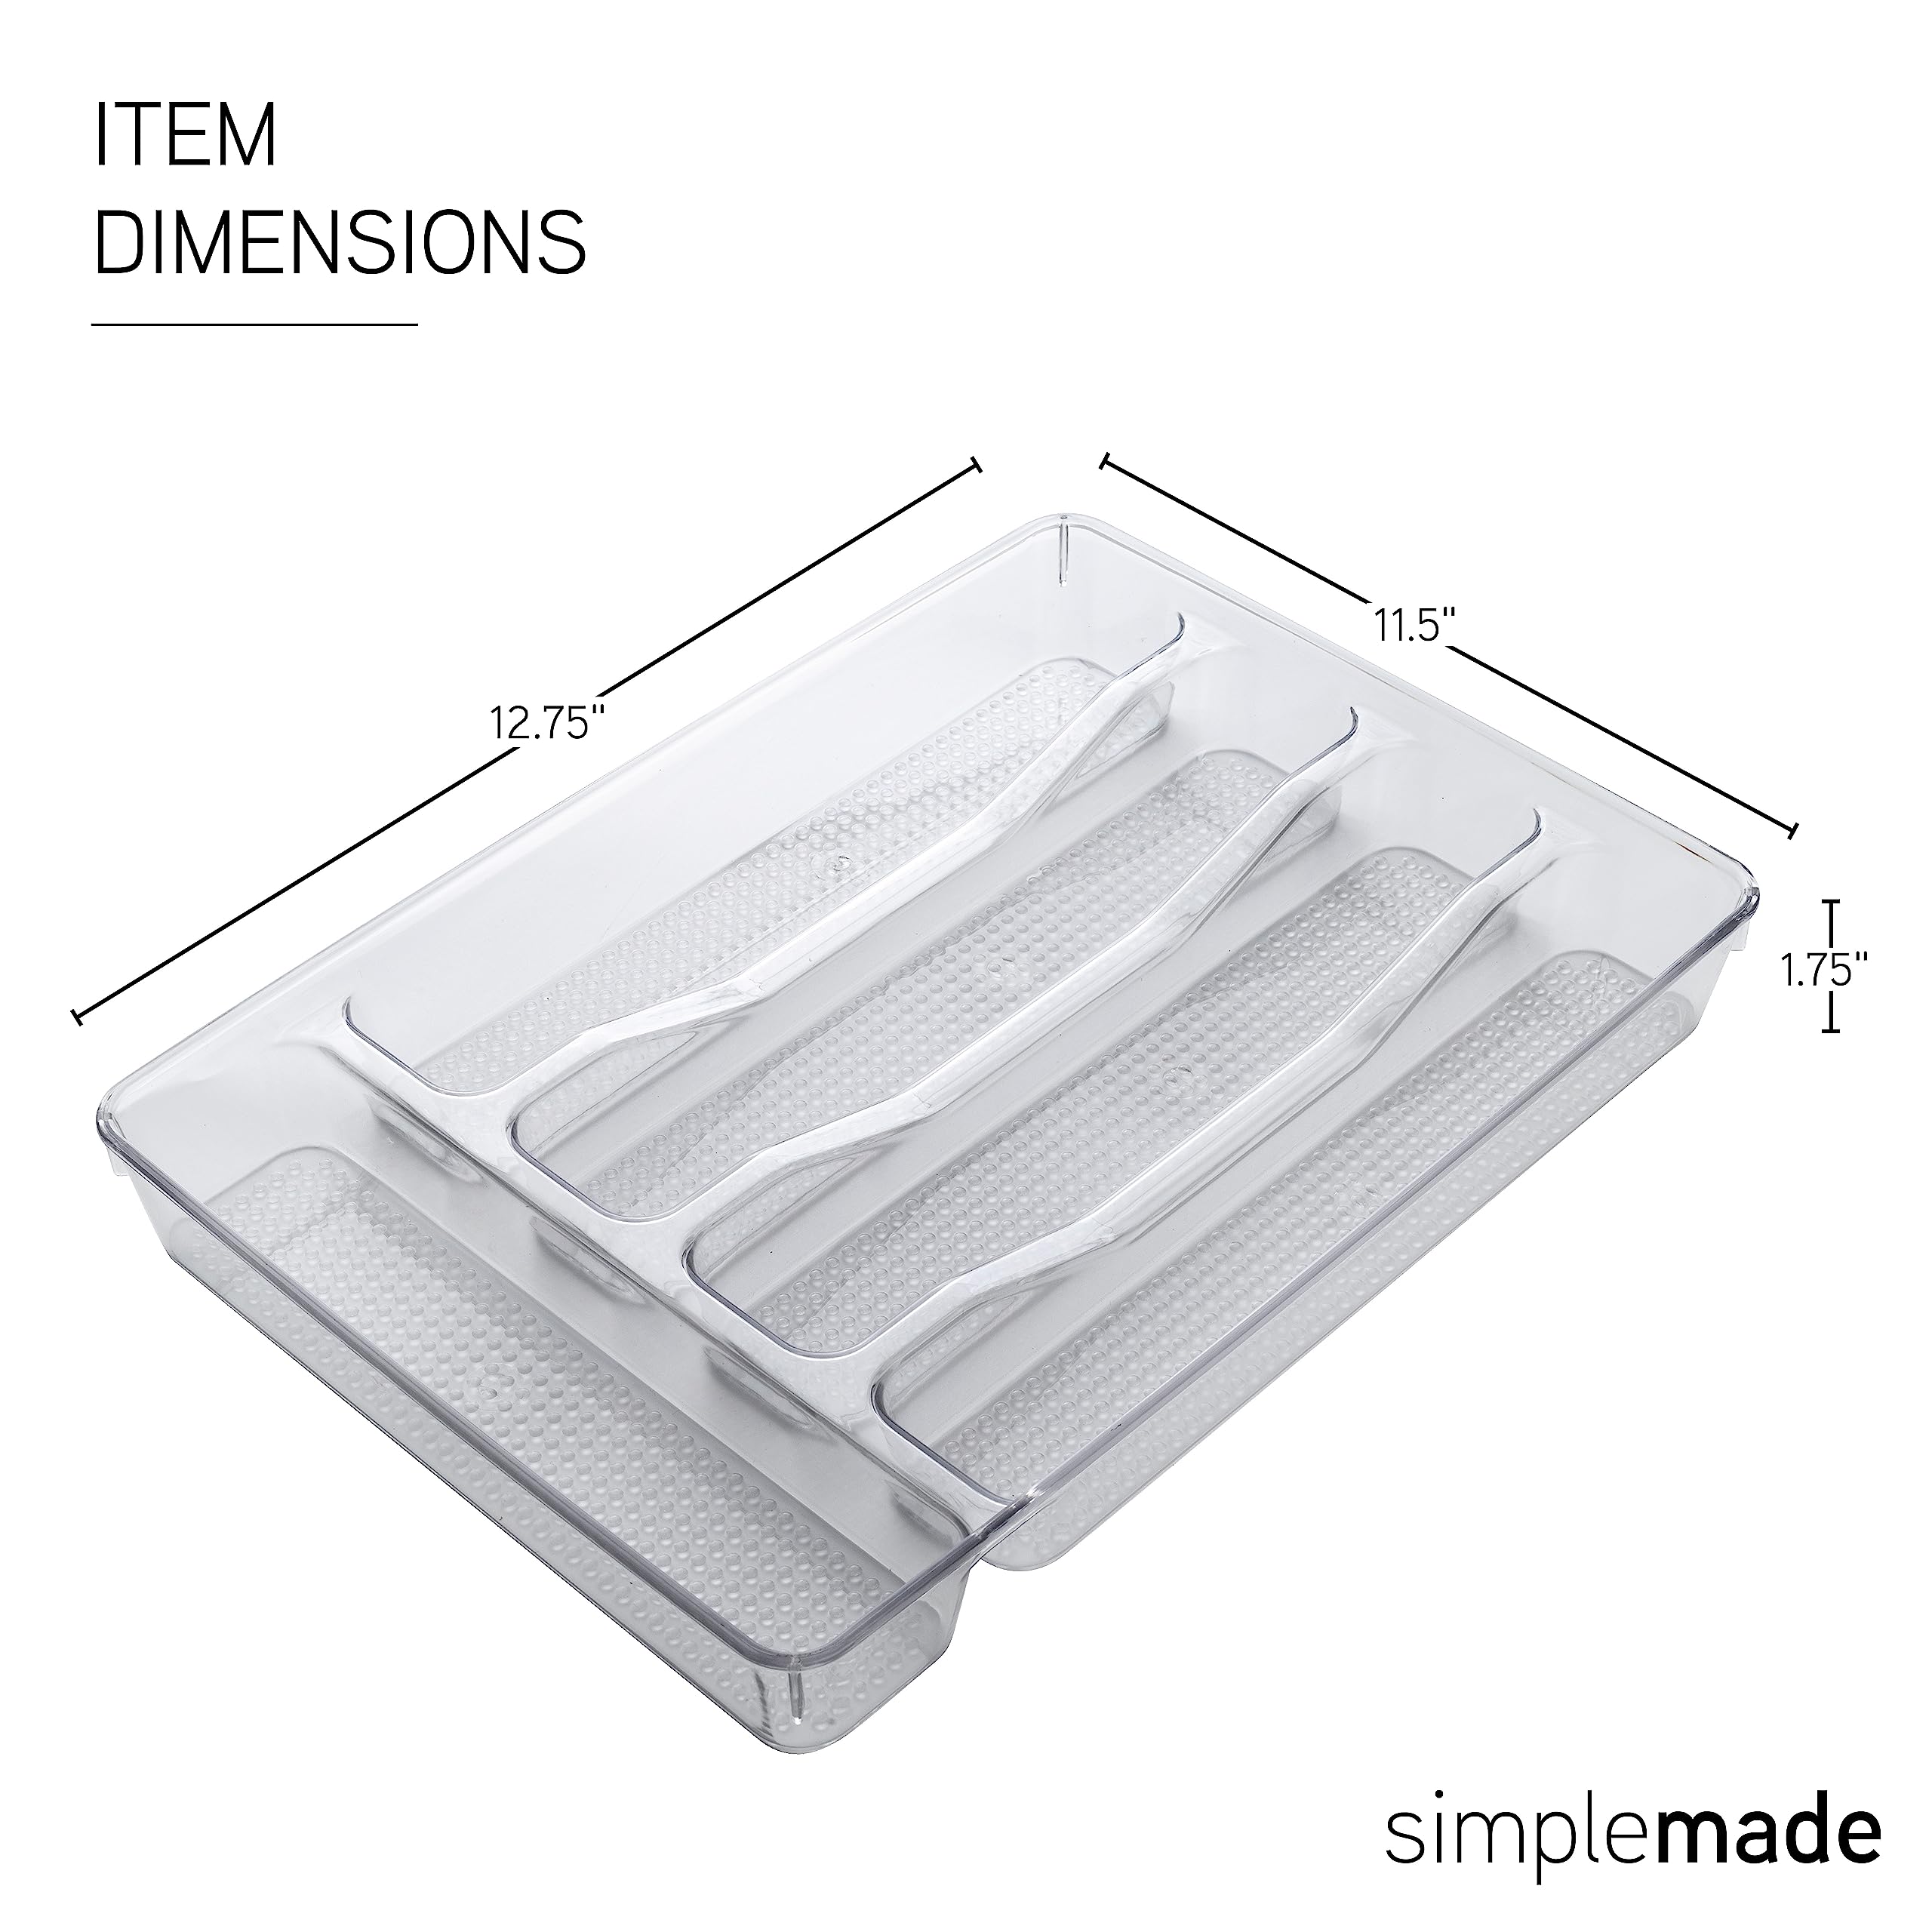 SIMPLEMADE Large Silverware Tray Organizer, 5-Compartments, Non-Slip Lining for Kitchen Drawer Flatware (Clear)  - Like New